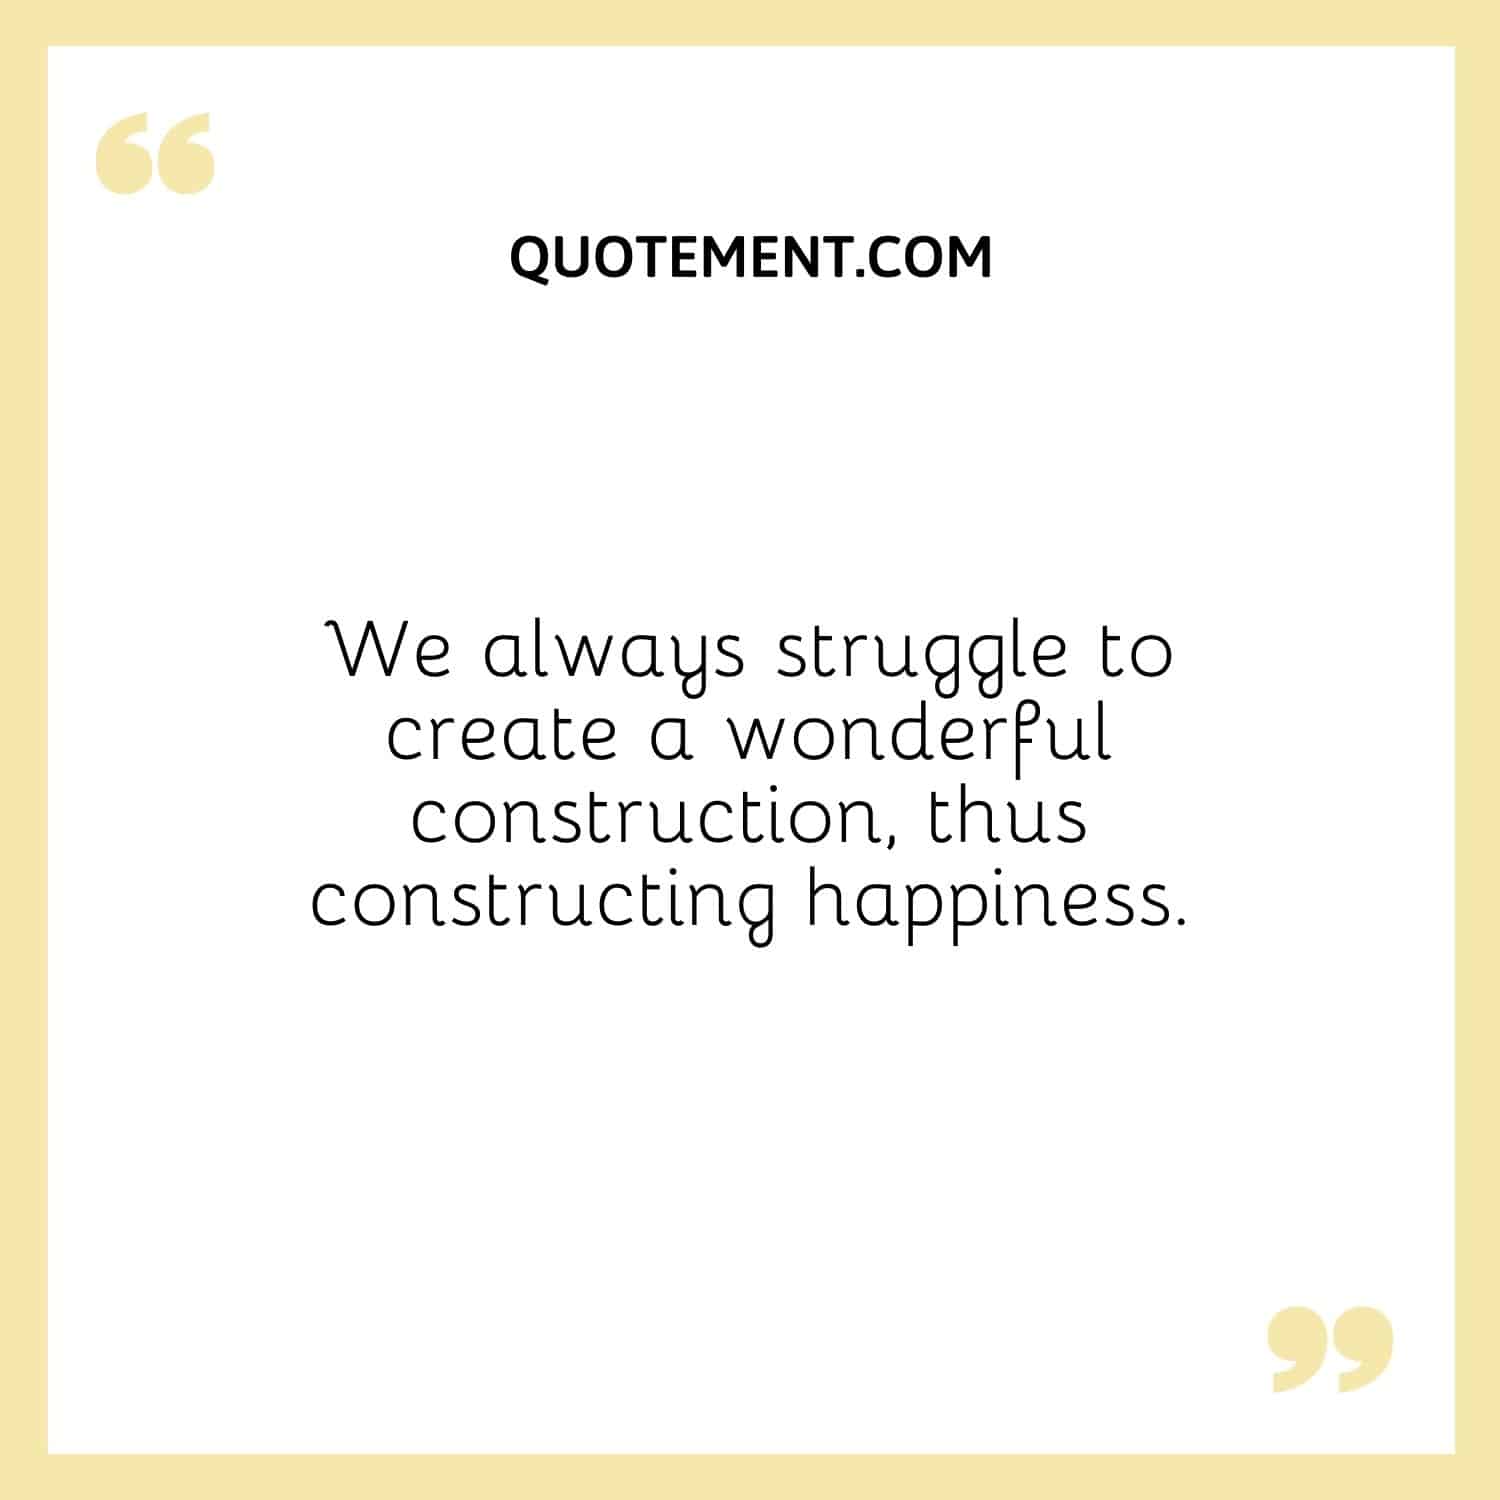 We always struggle to create a wonderful construction, thus constructing happiness.